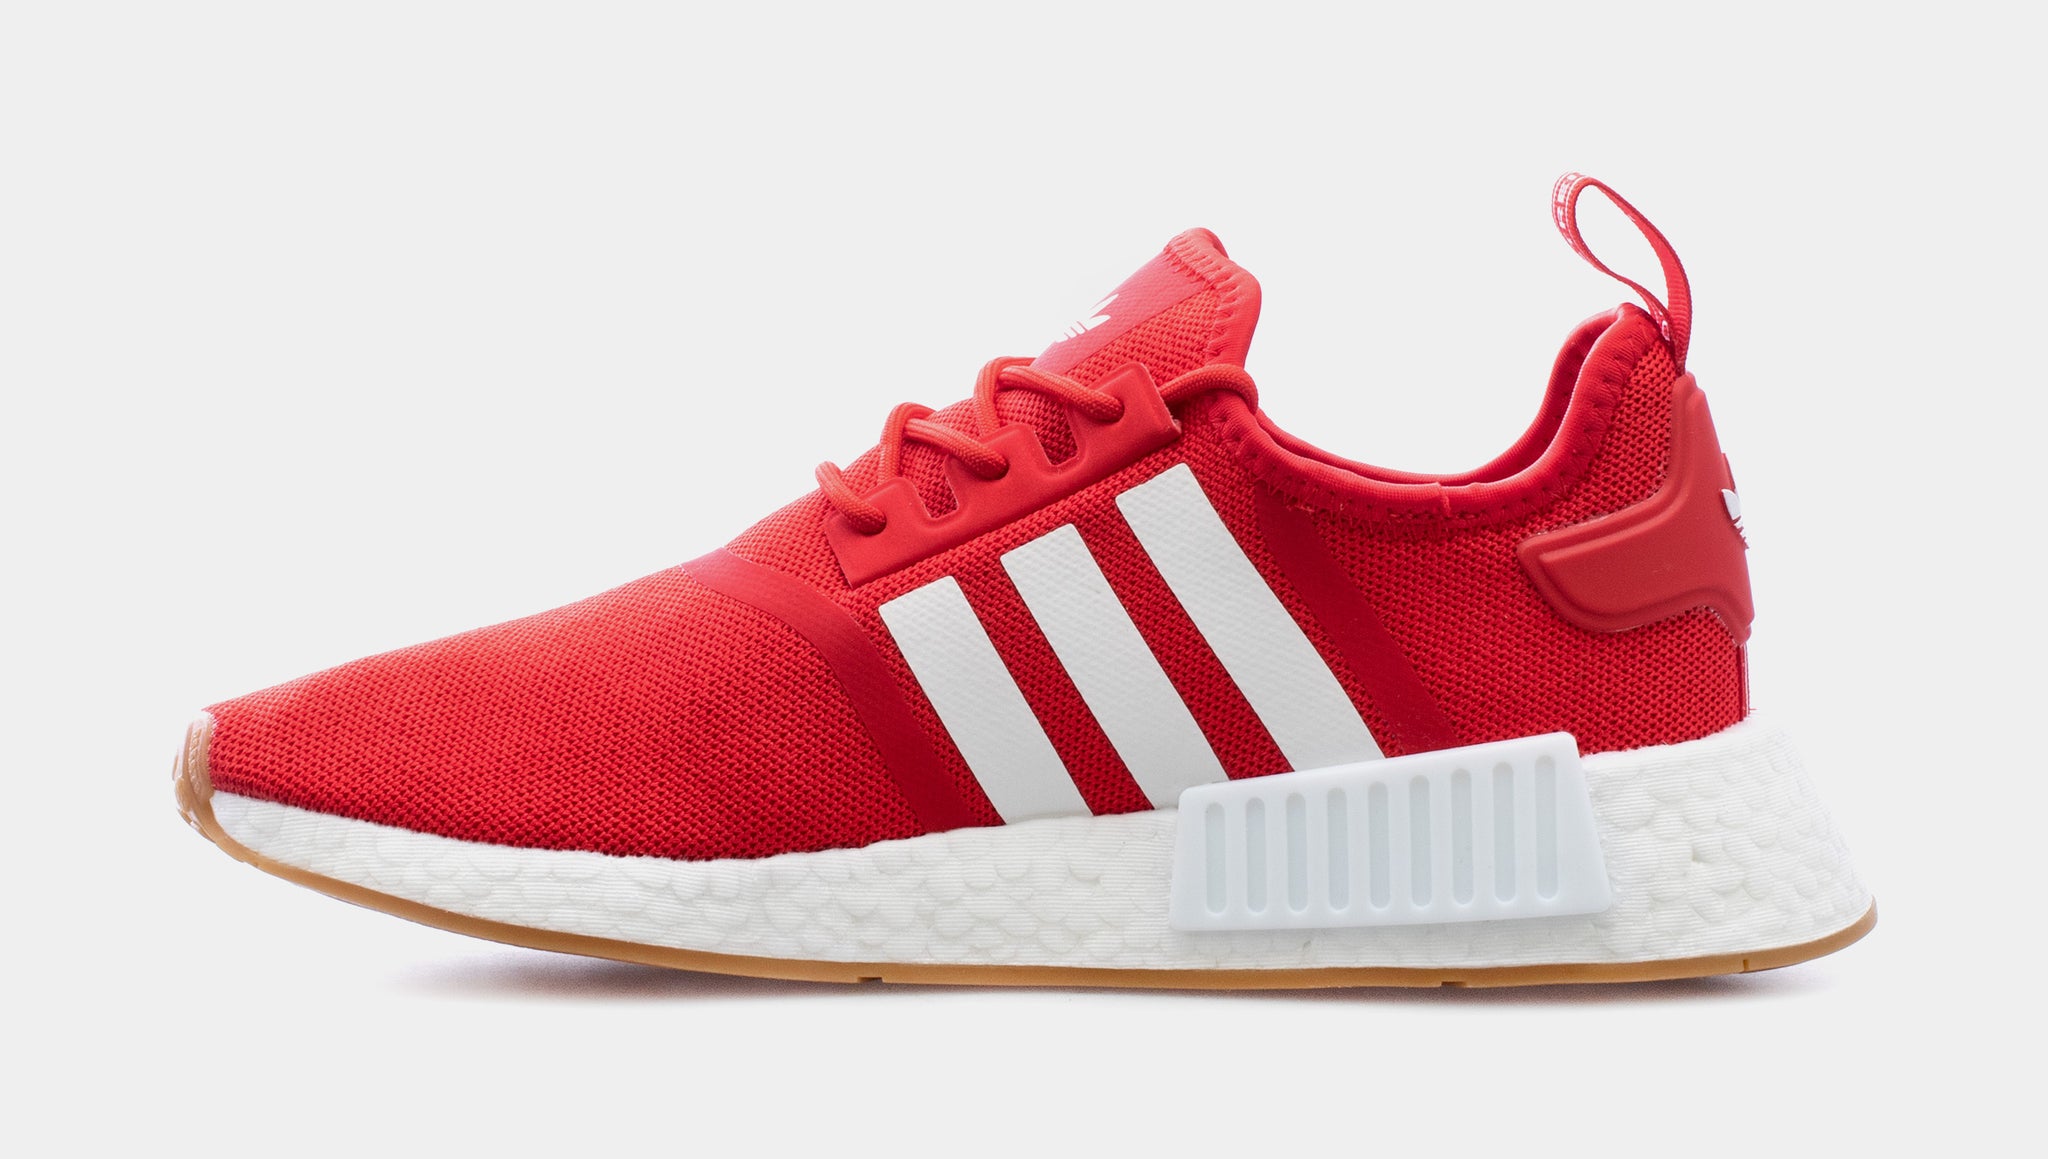 Red-and-white Palace x Adidas sneakers